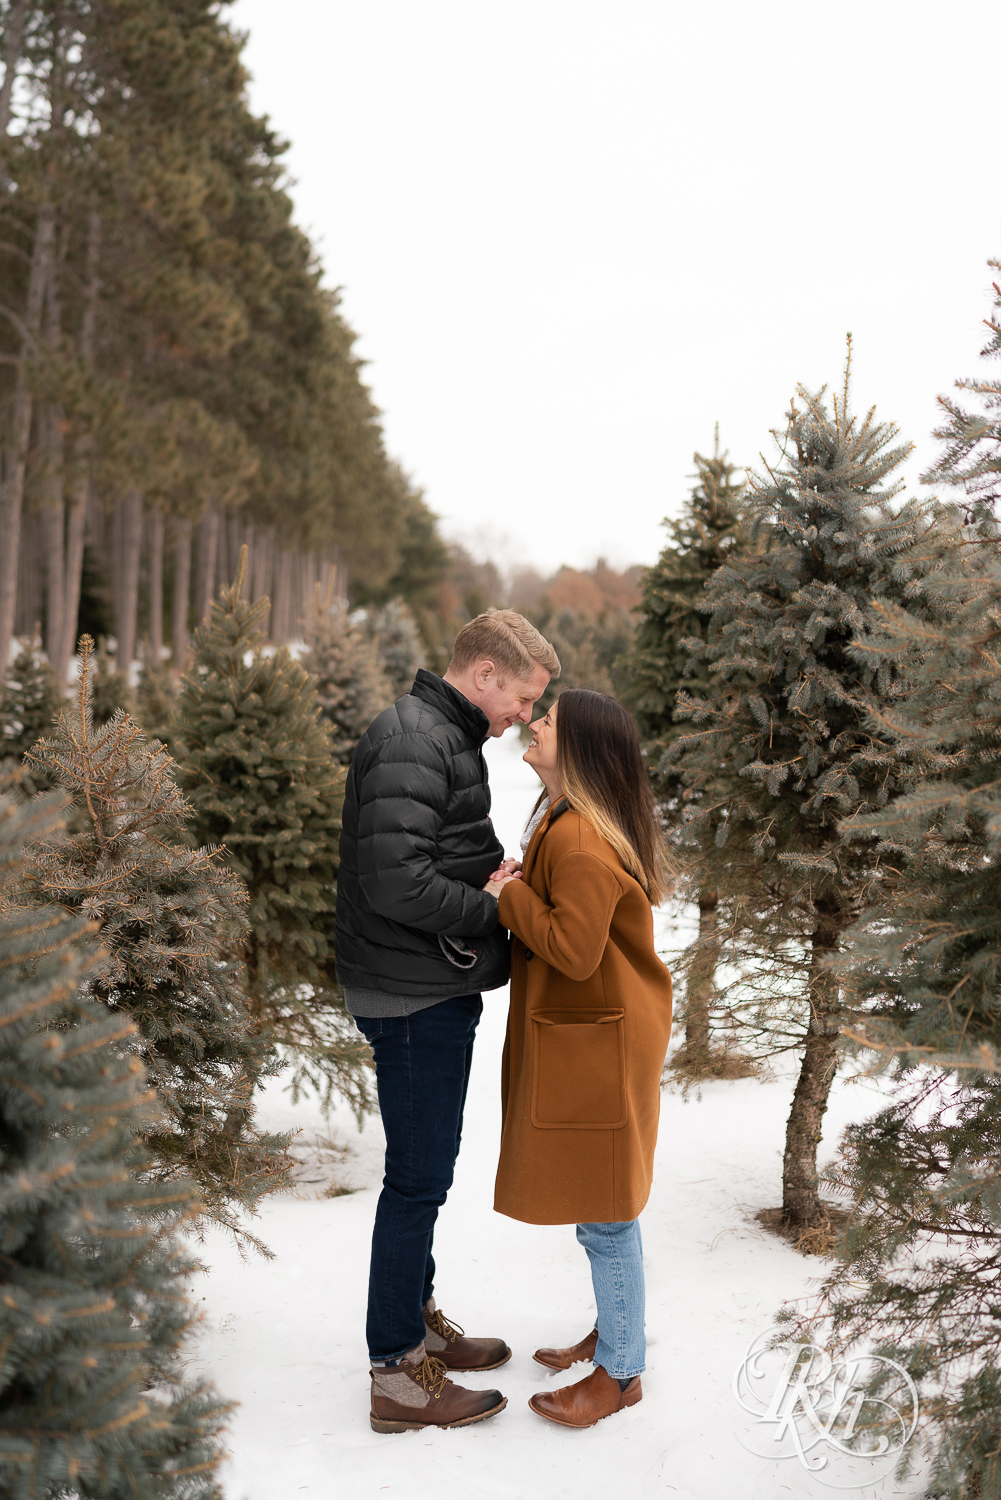 Man and woman smiling in between pine trees in the snow at Hansen Tree Farm in Anoka, Minnesota.